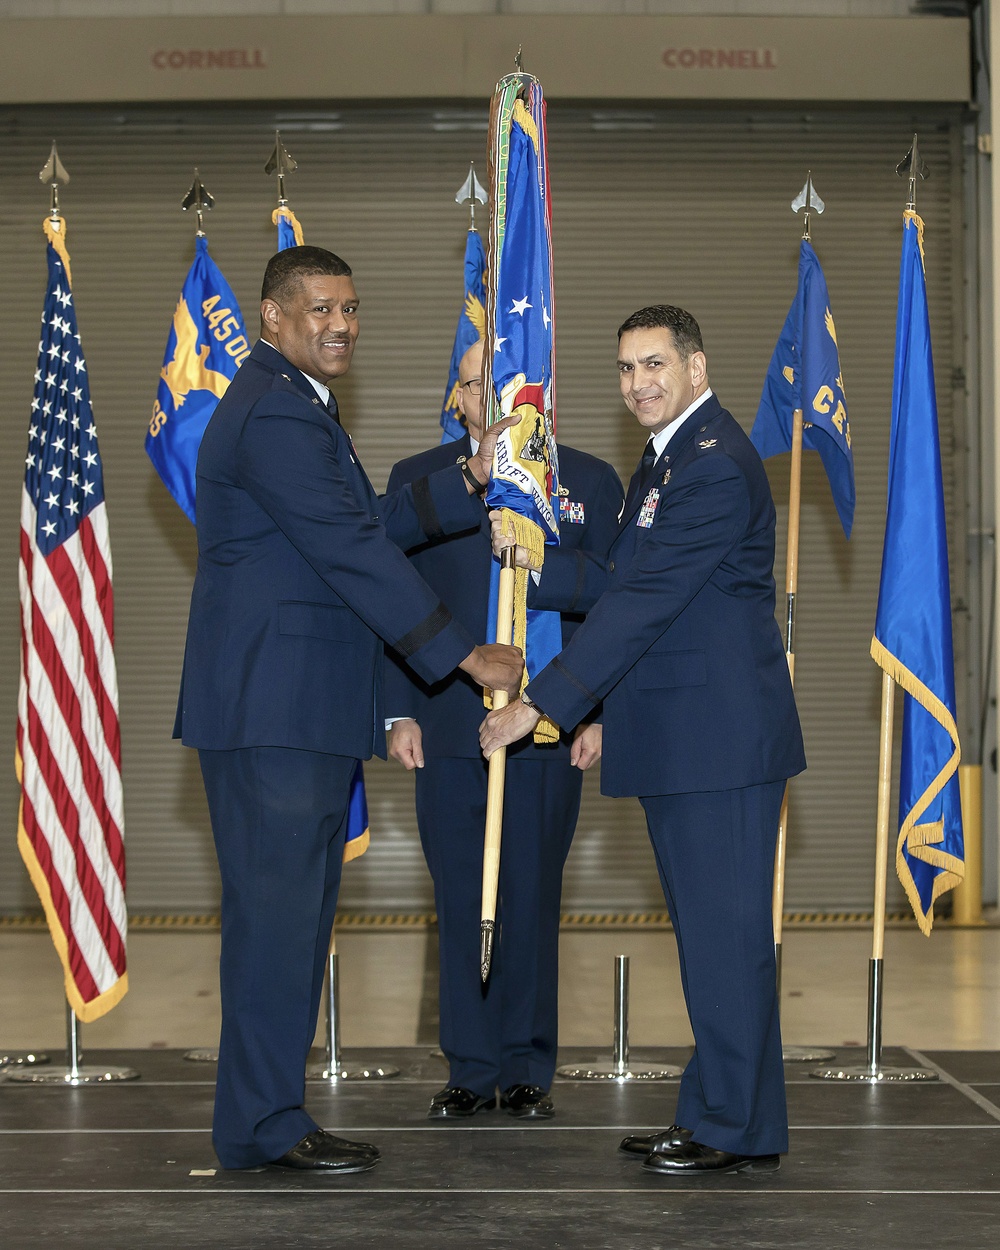 Smith assumes command of 445th Airlift Wing